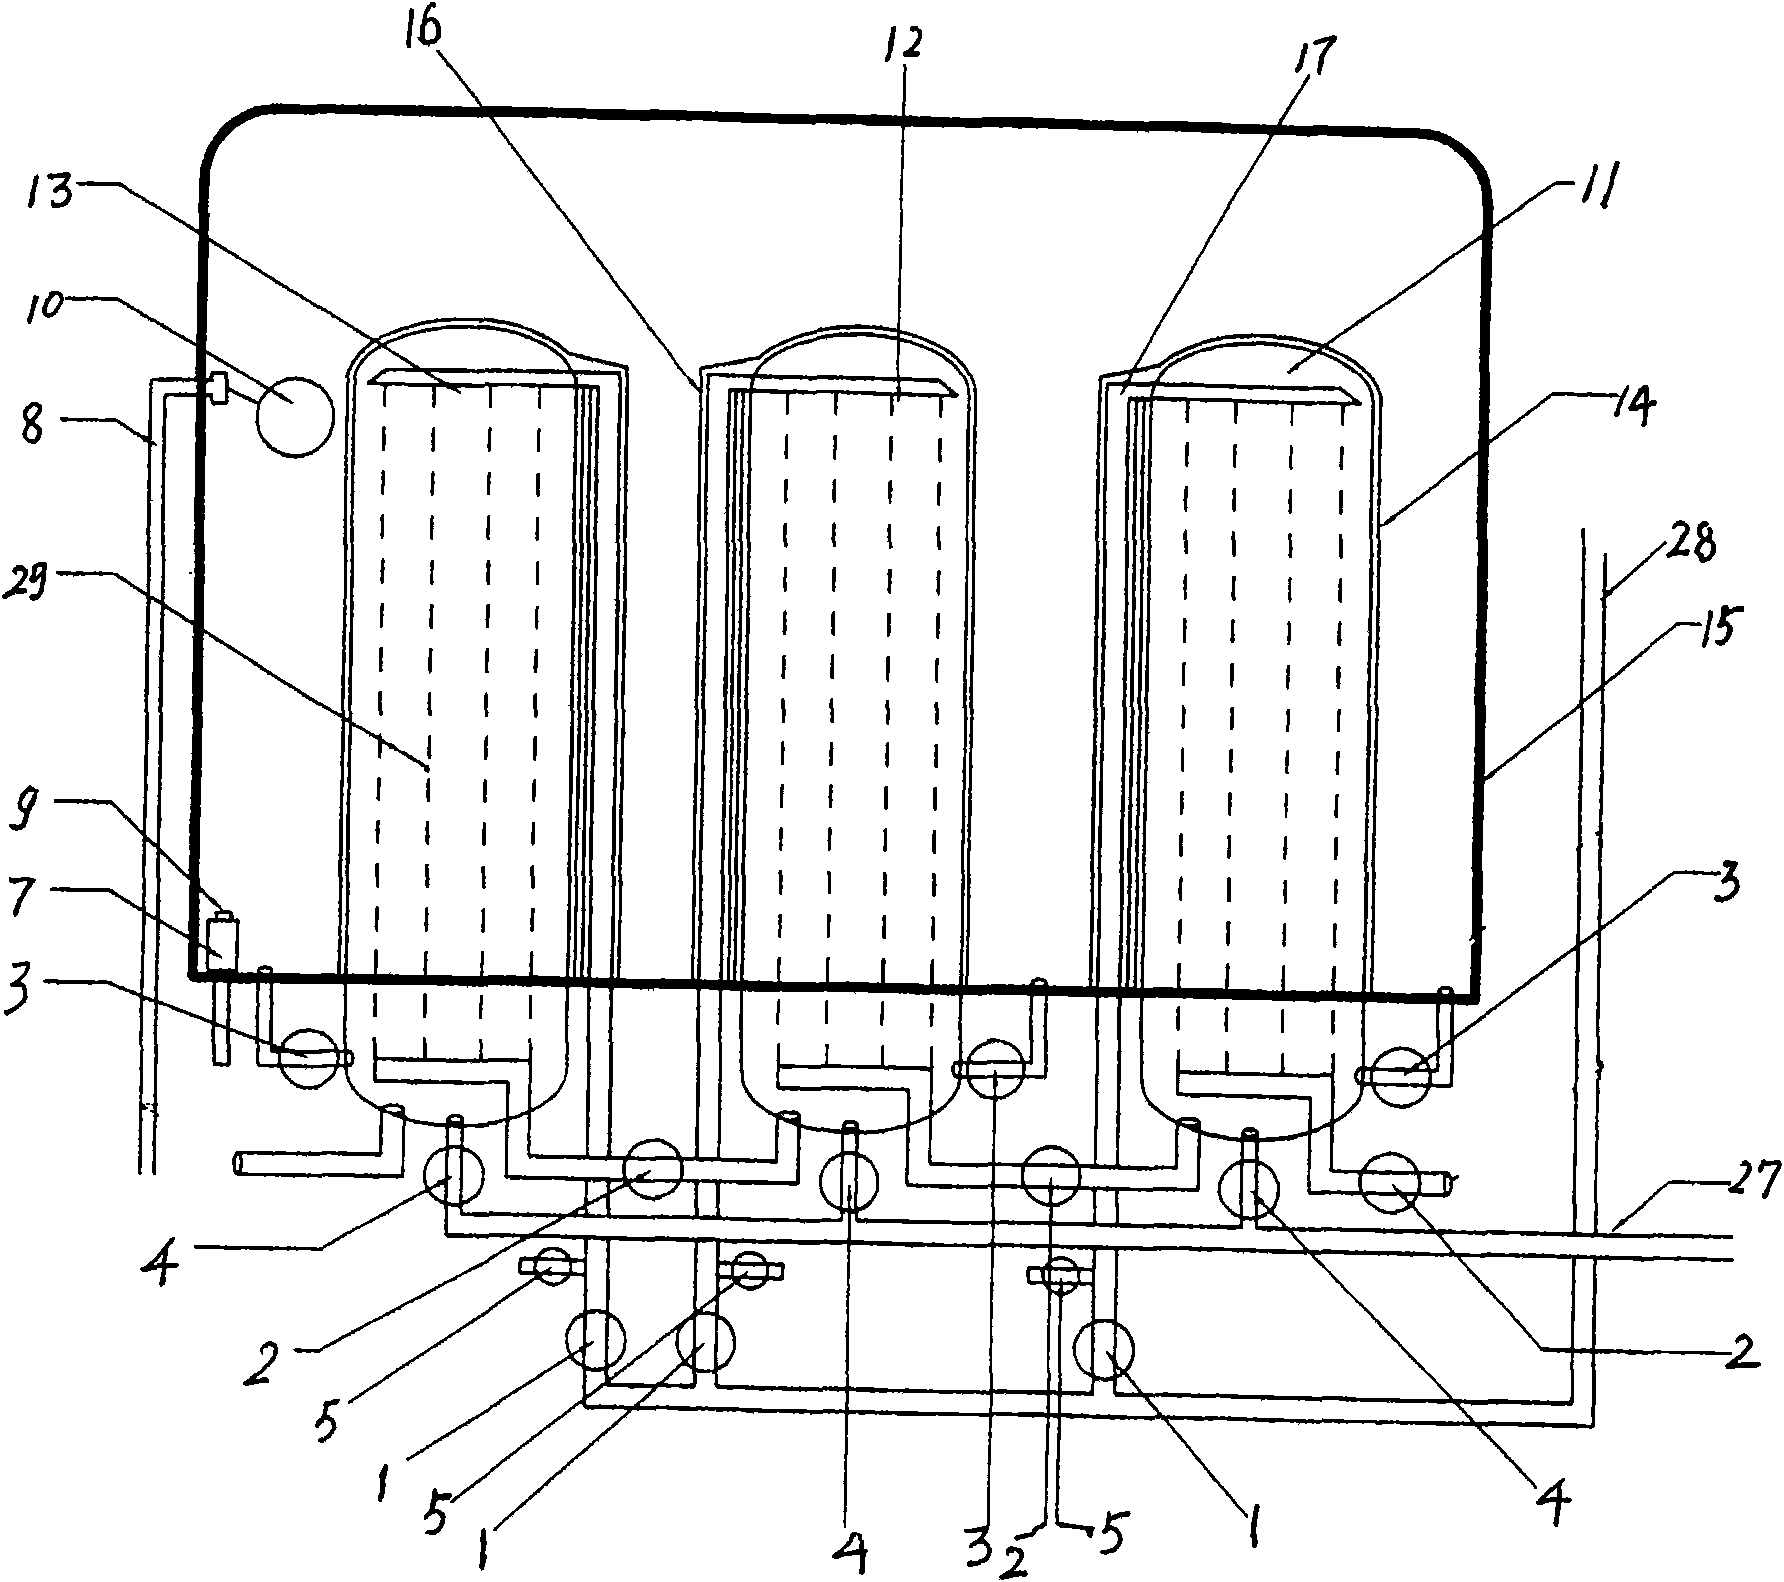 High-pressure boiler provided with full-automatic water adding device